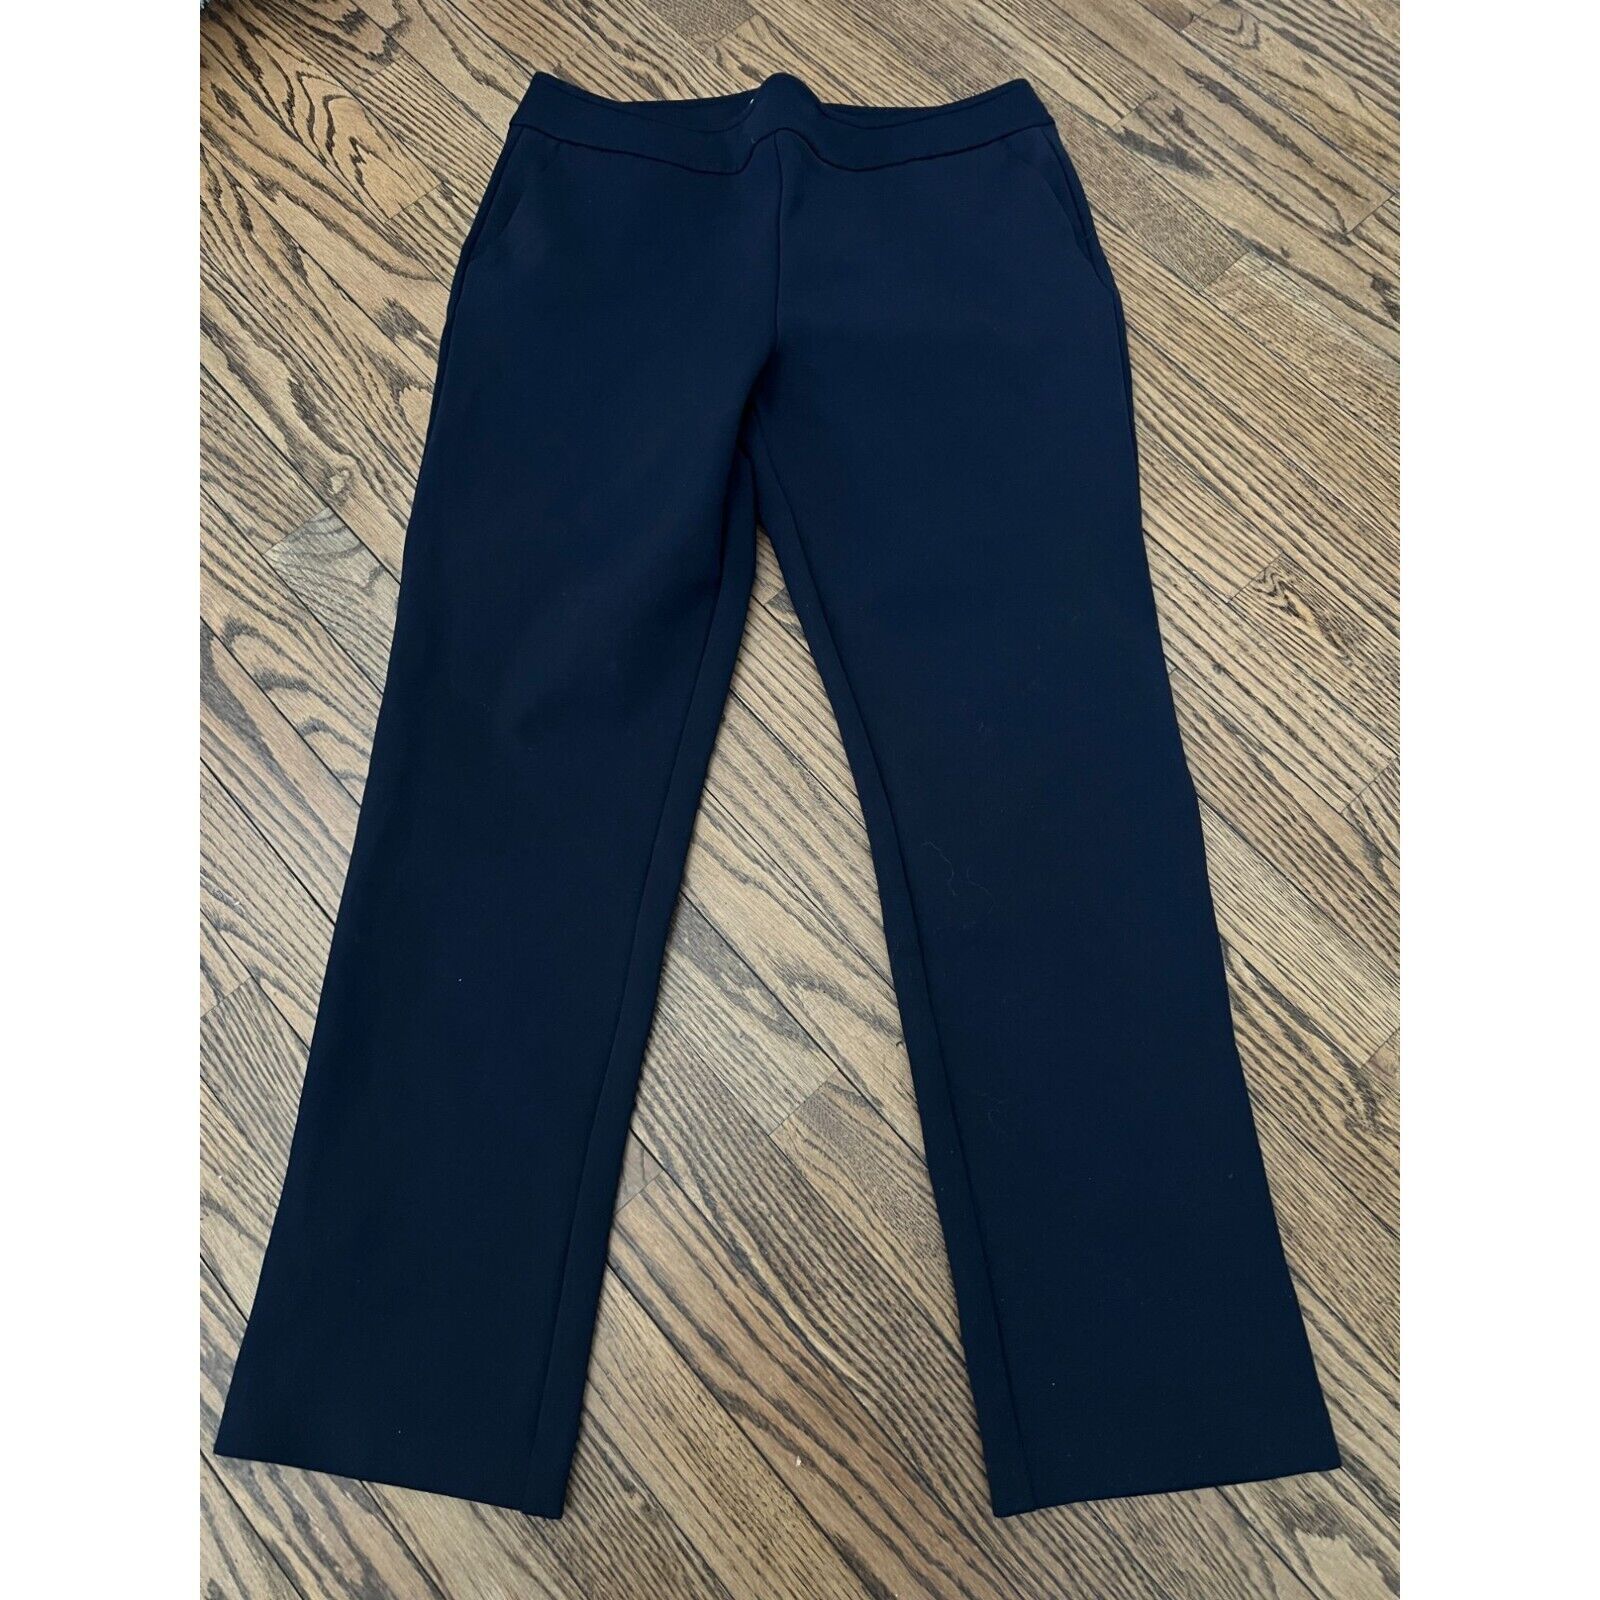 Avenue Montaigne Navy Pull On Pants Size 12 - image 1